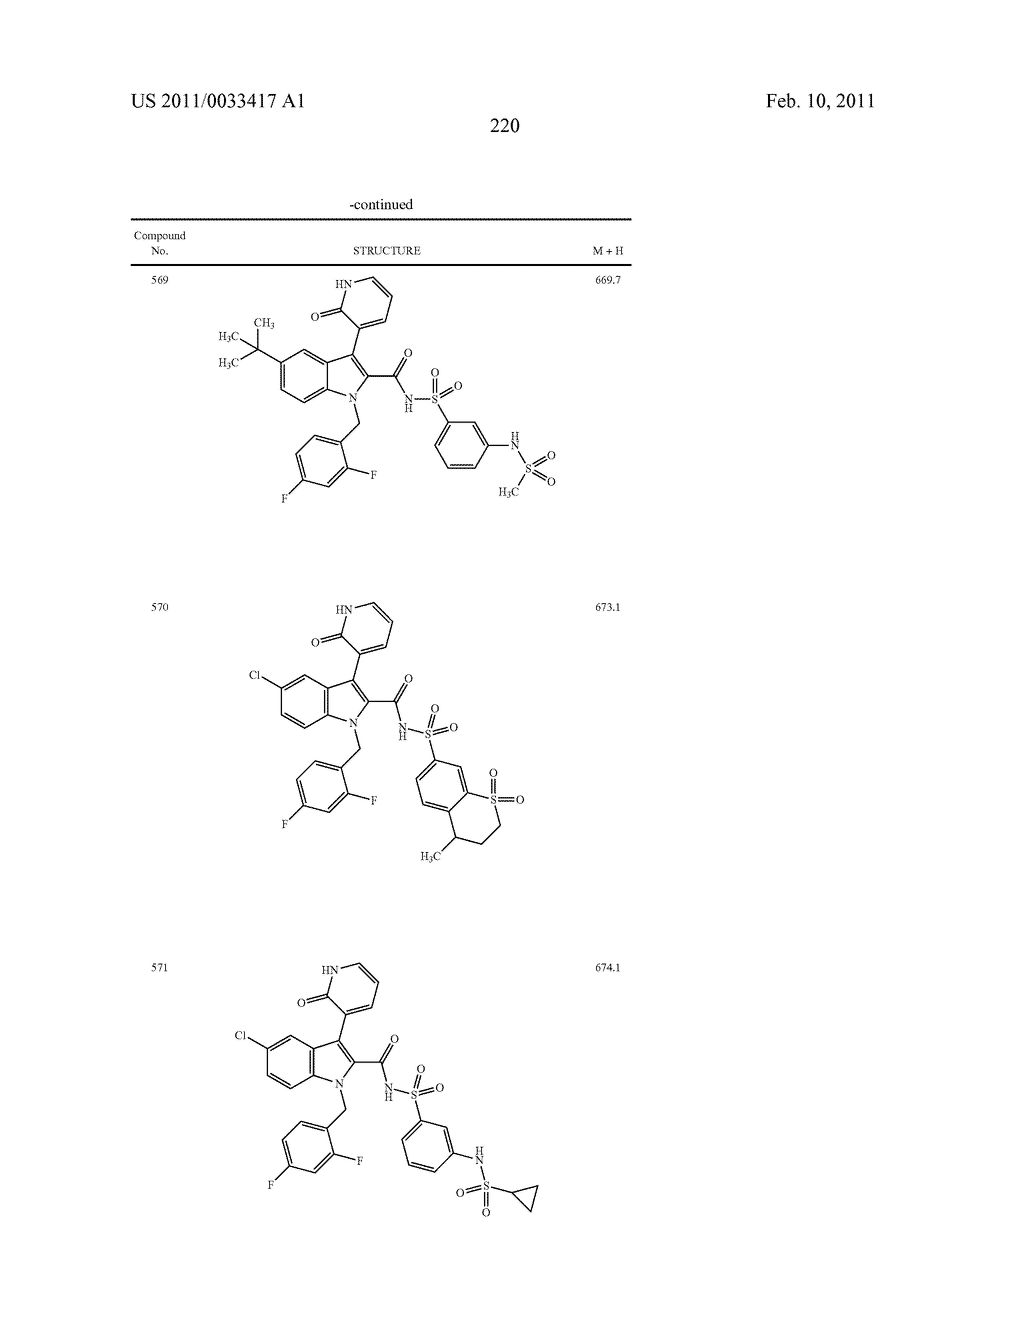 2,3-SUBSTITUTED INDOLE DERIVATIVES FOR TREATING VIRAL INFECTIONS - diagram, schematic, and image 221